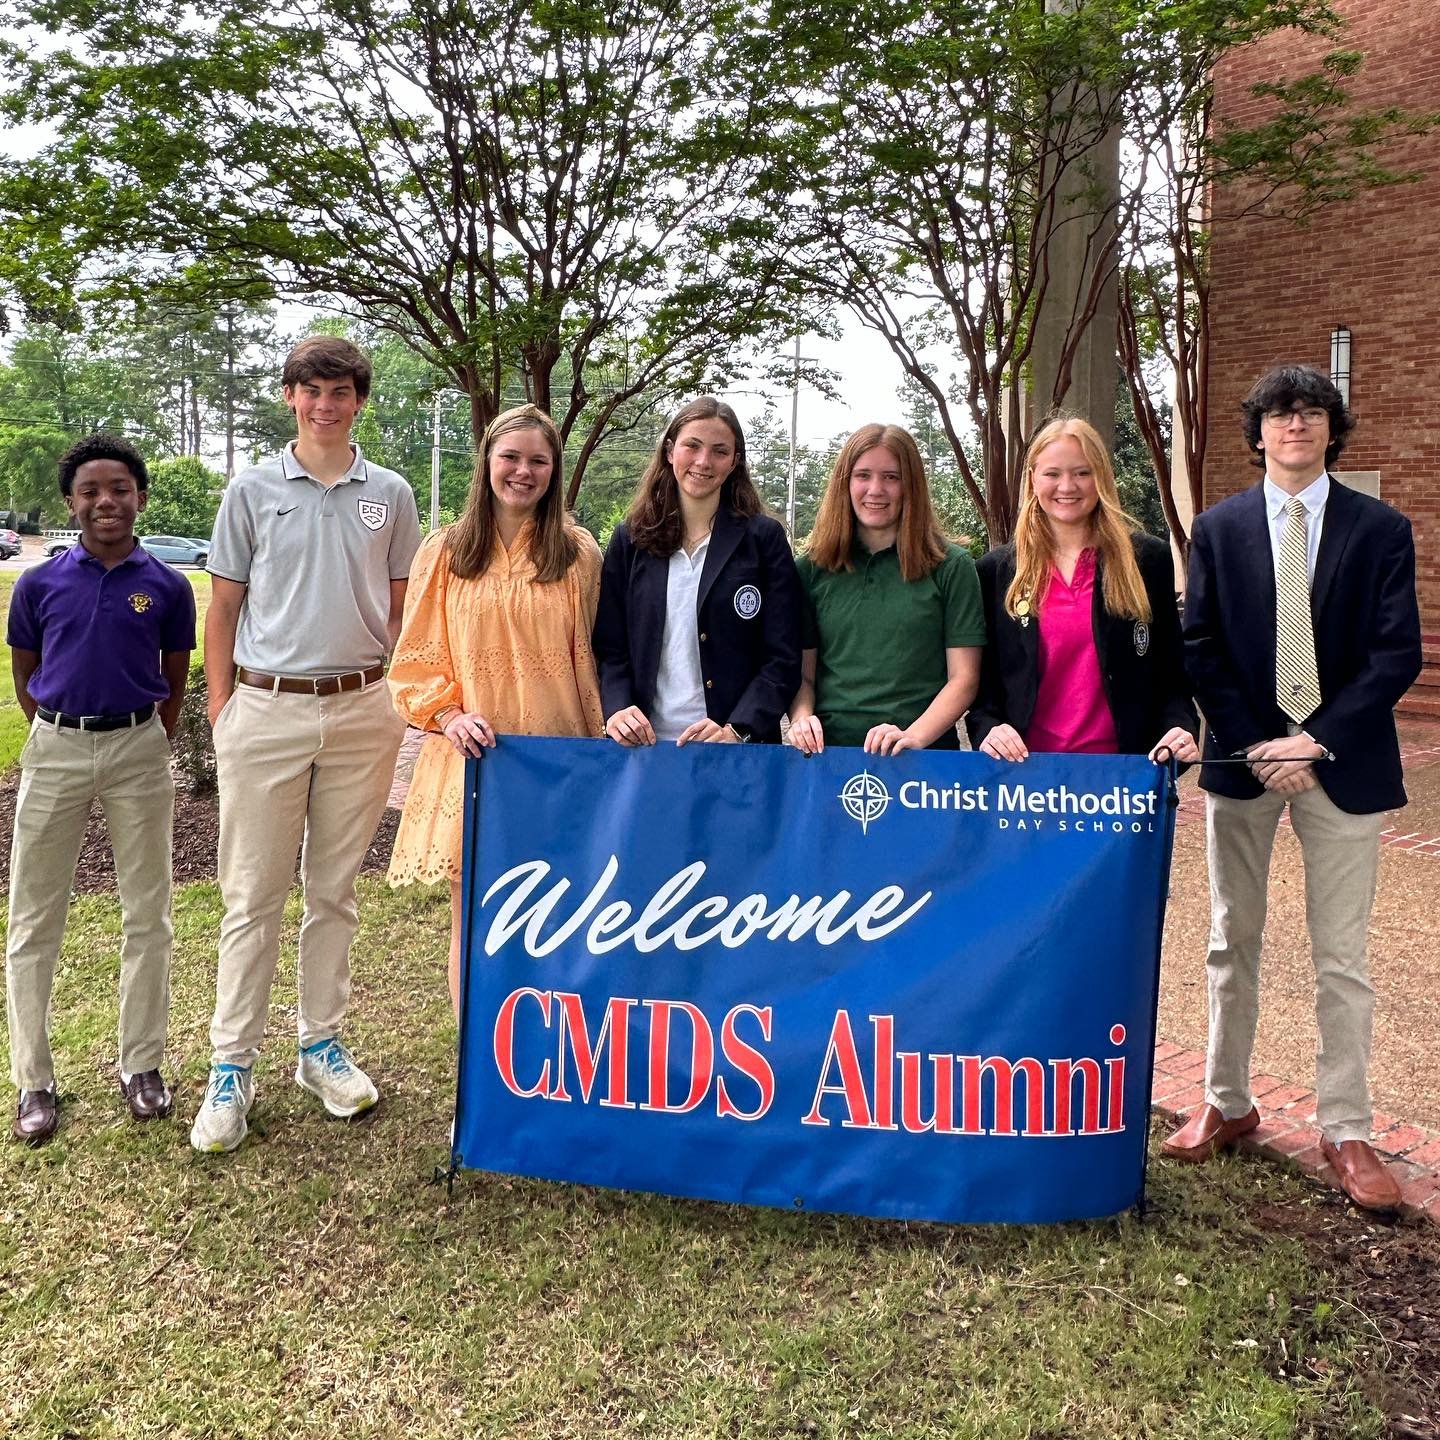 We had the best morning at our inaugural CMDS Alumni Chapel! It was so good to see familiar faces, reminisce, and reconnect. Our young alumni speakers spoke to our four pillars and were an incredible representation of how CMDS prepares our students. 